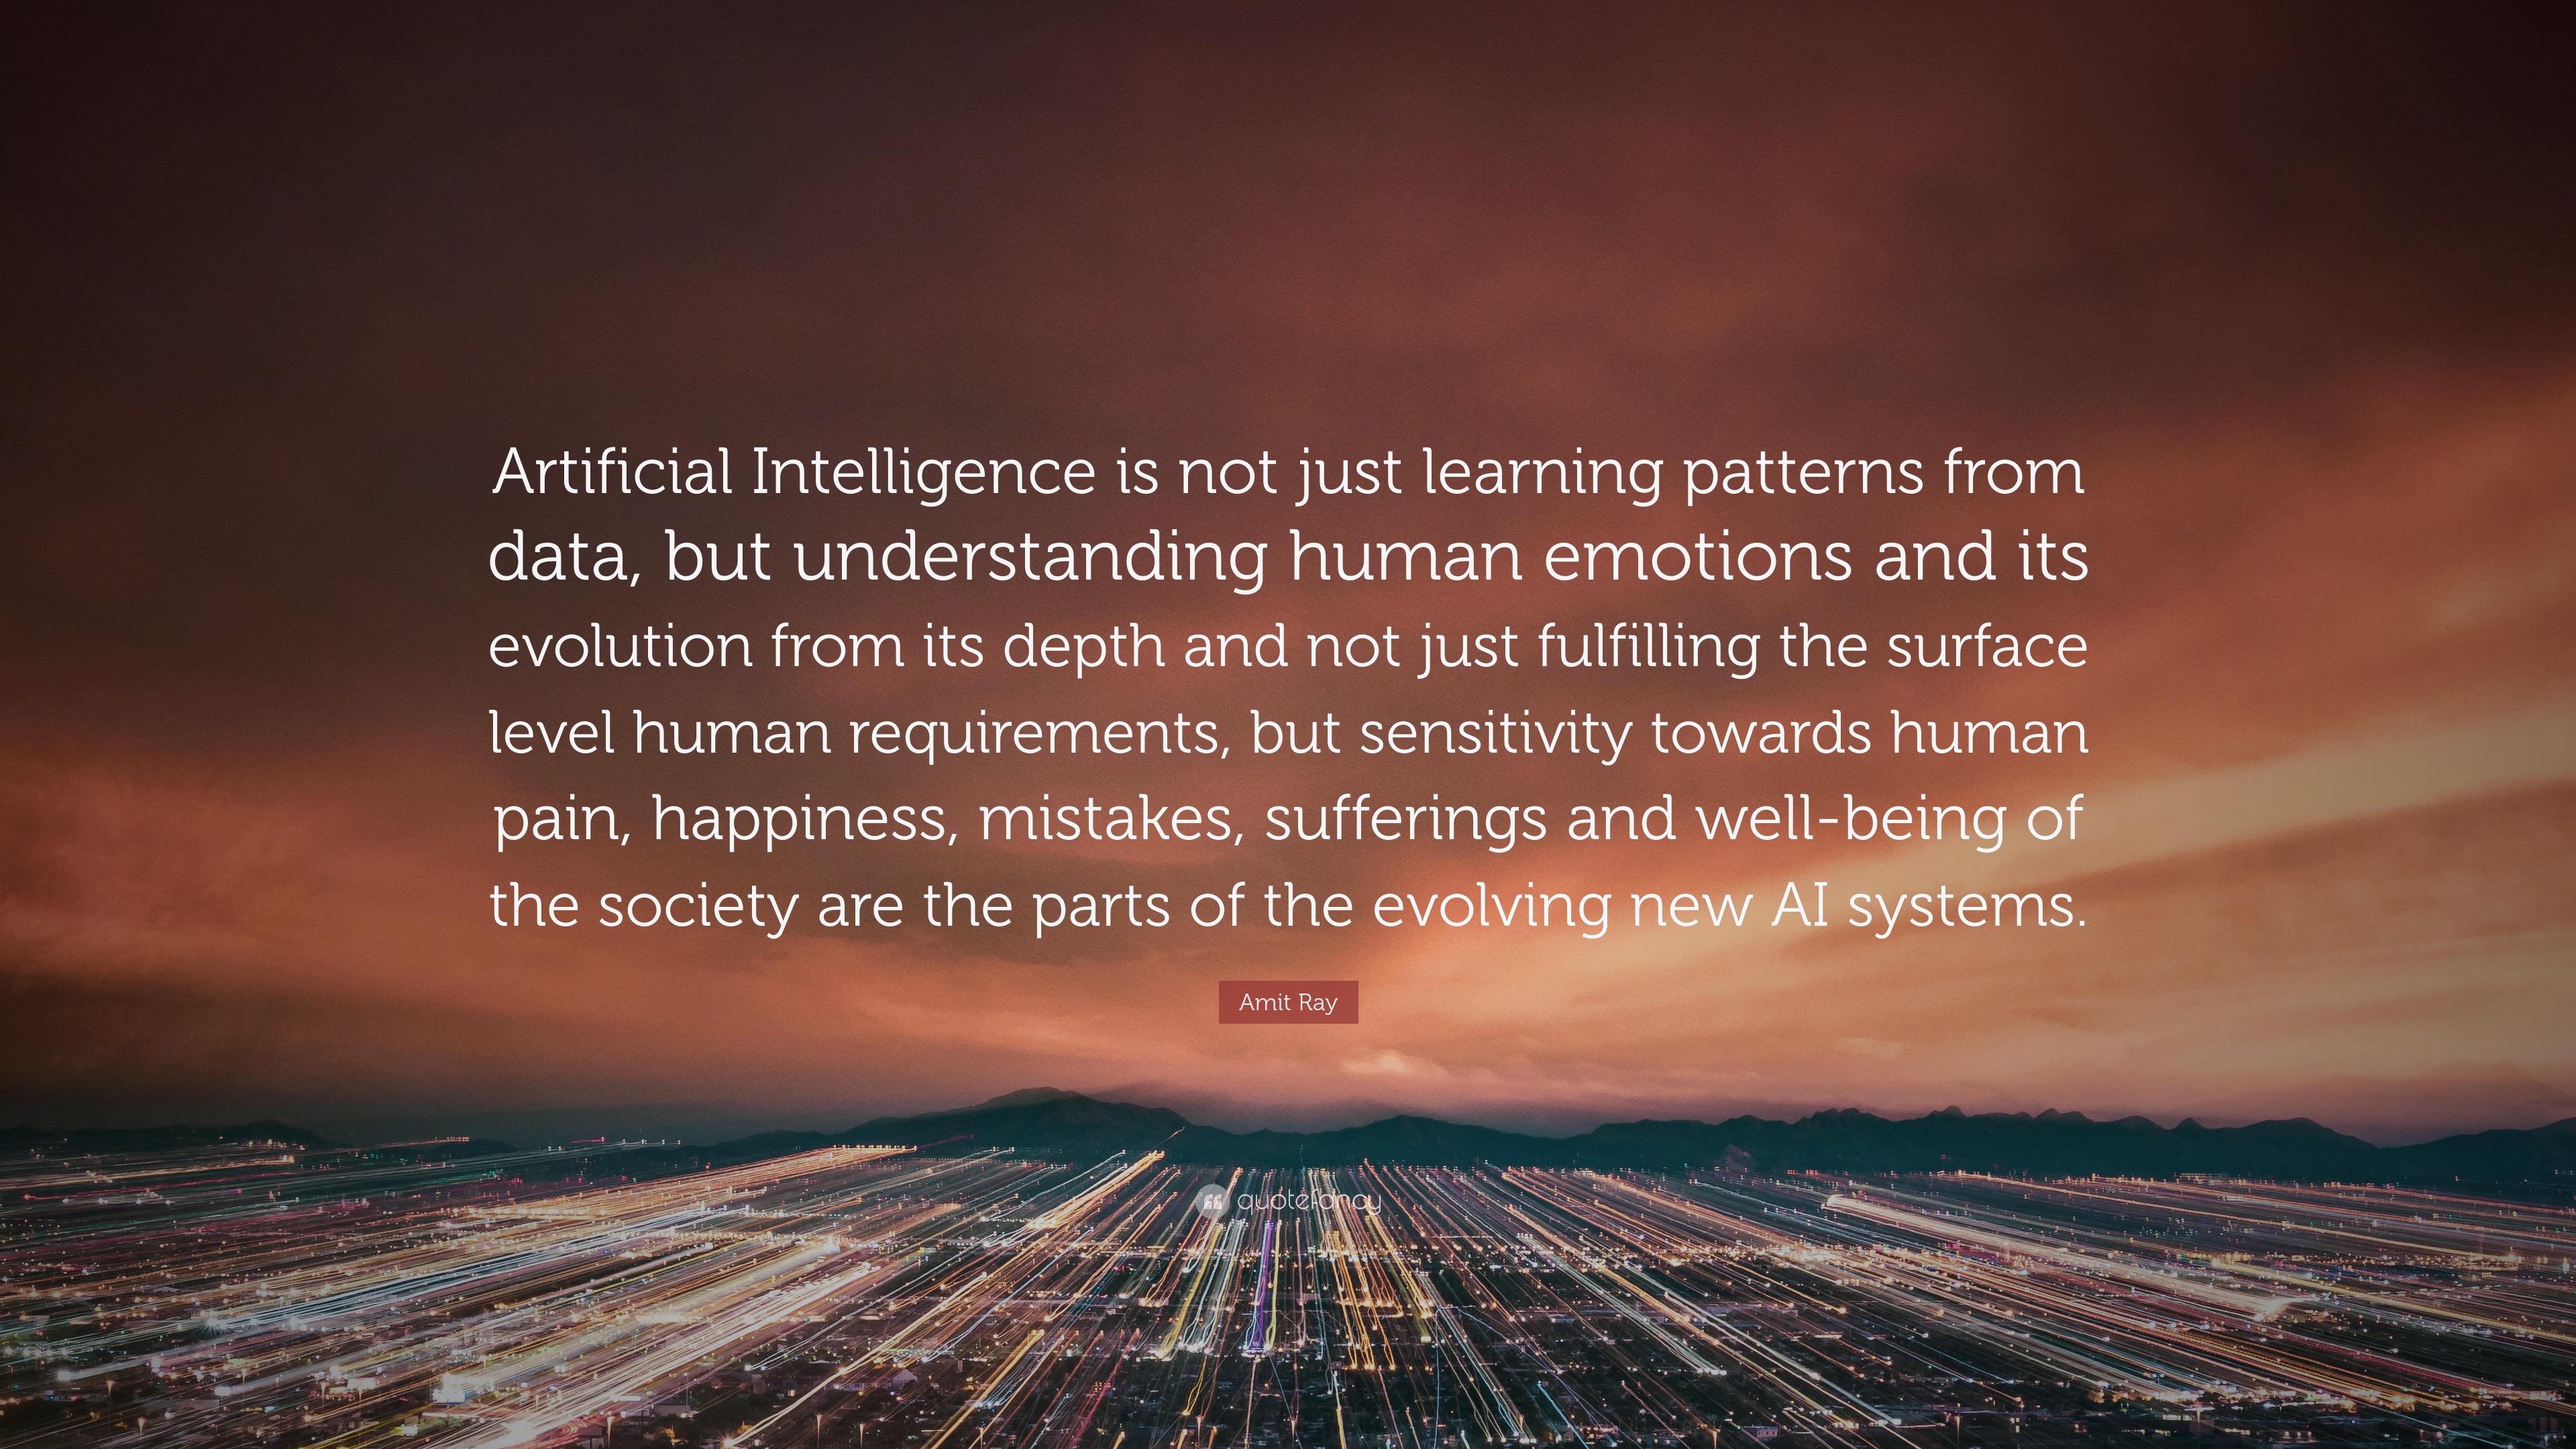 Amit Ray Quote: “Artificial Intelligence is not just learning patterns ...